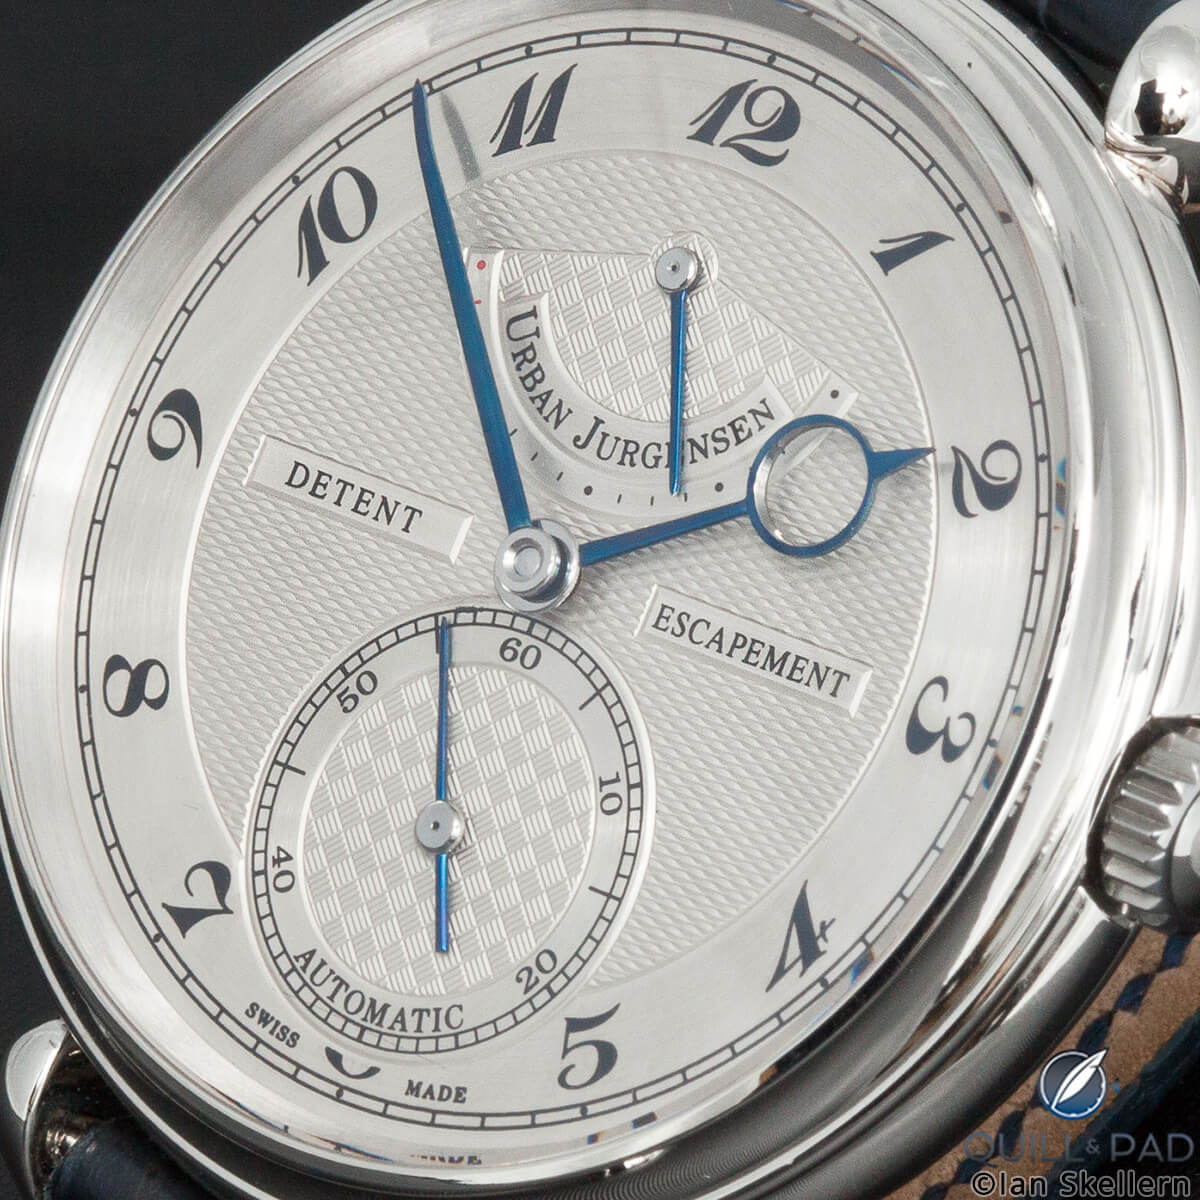 Urban Jürgensen’s P8 pivoted detente escapement made its debut at Baselworld 2011